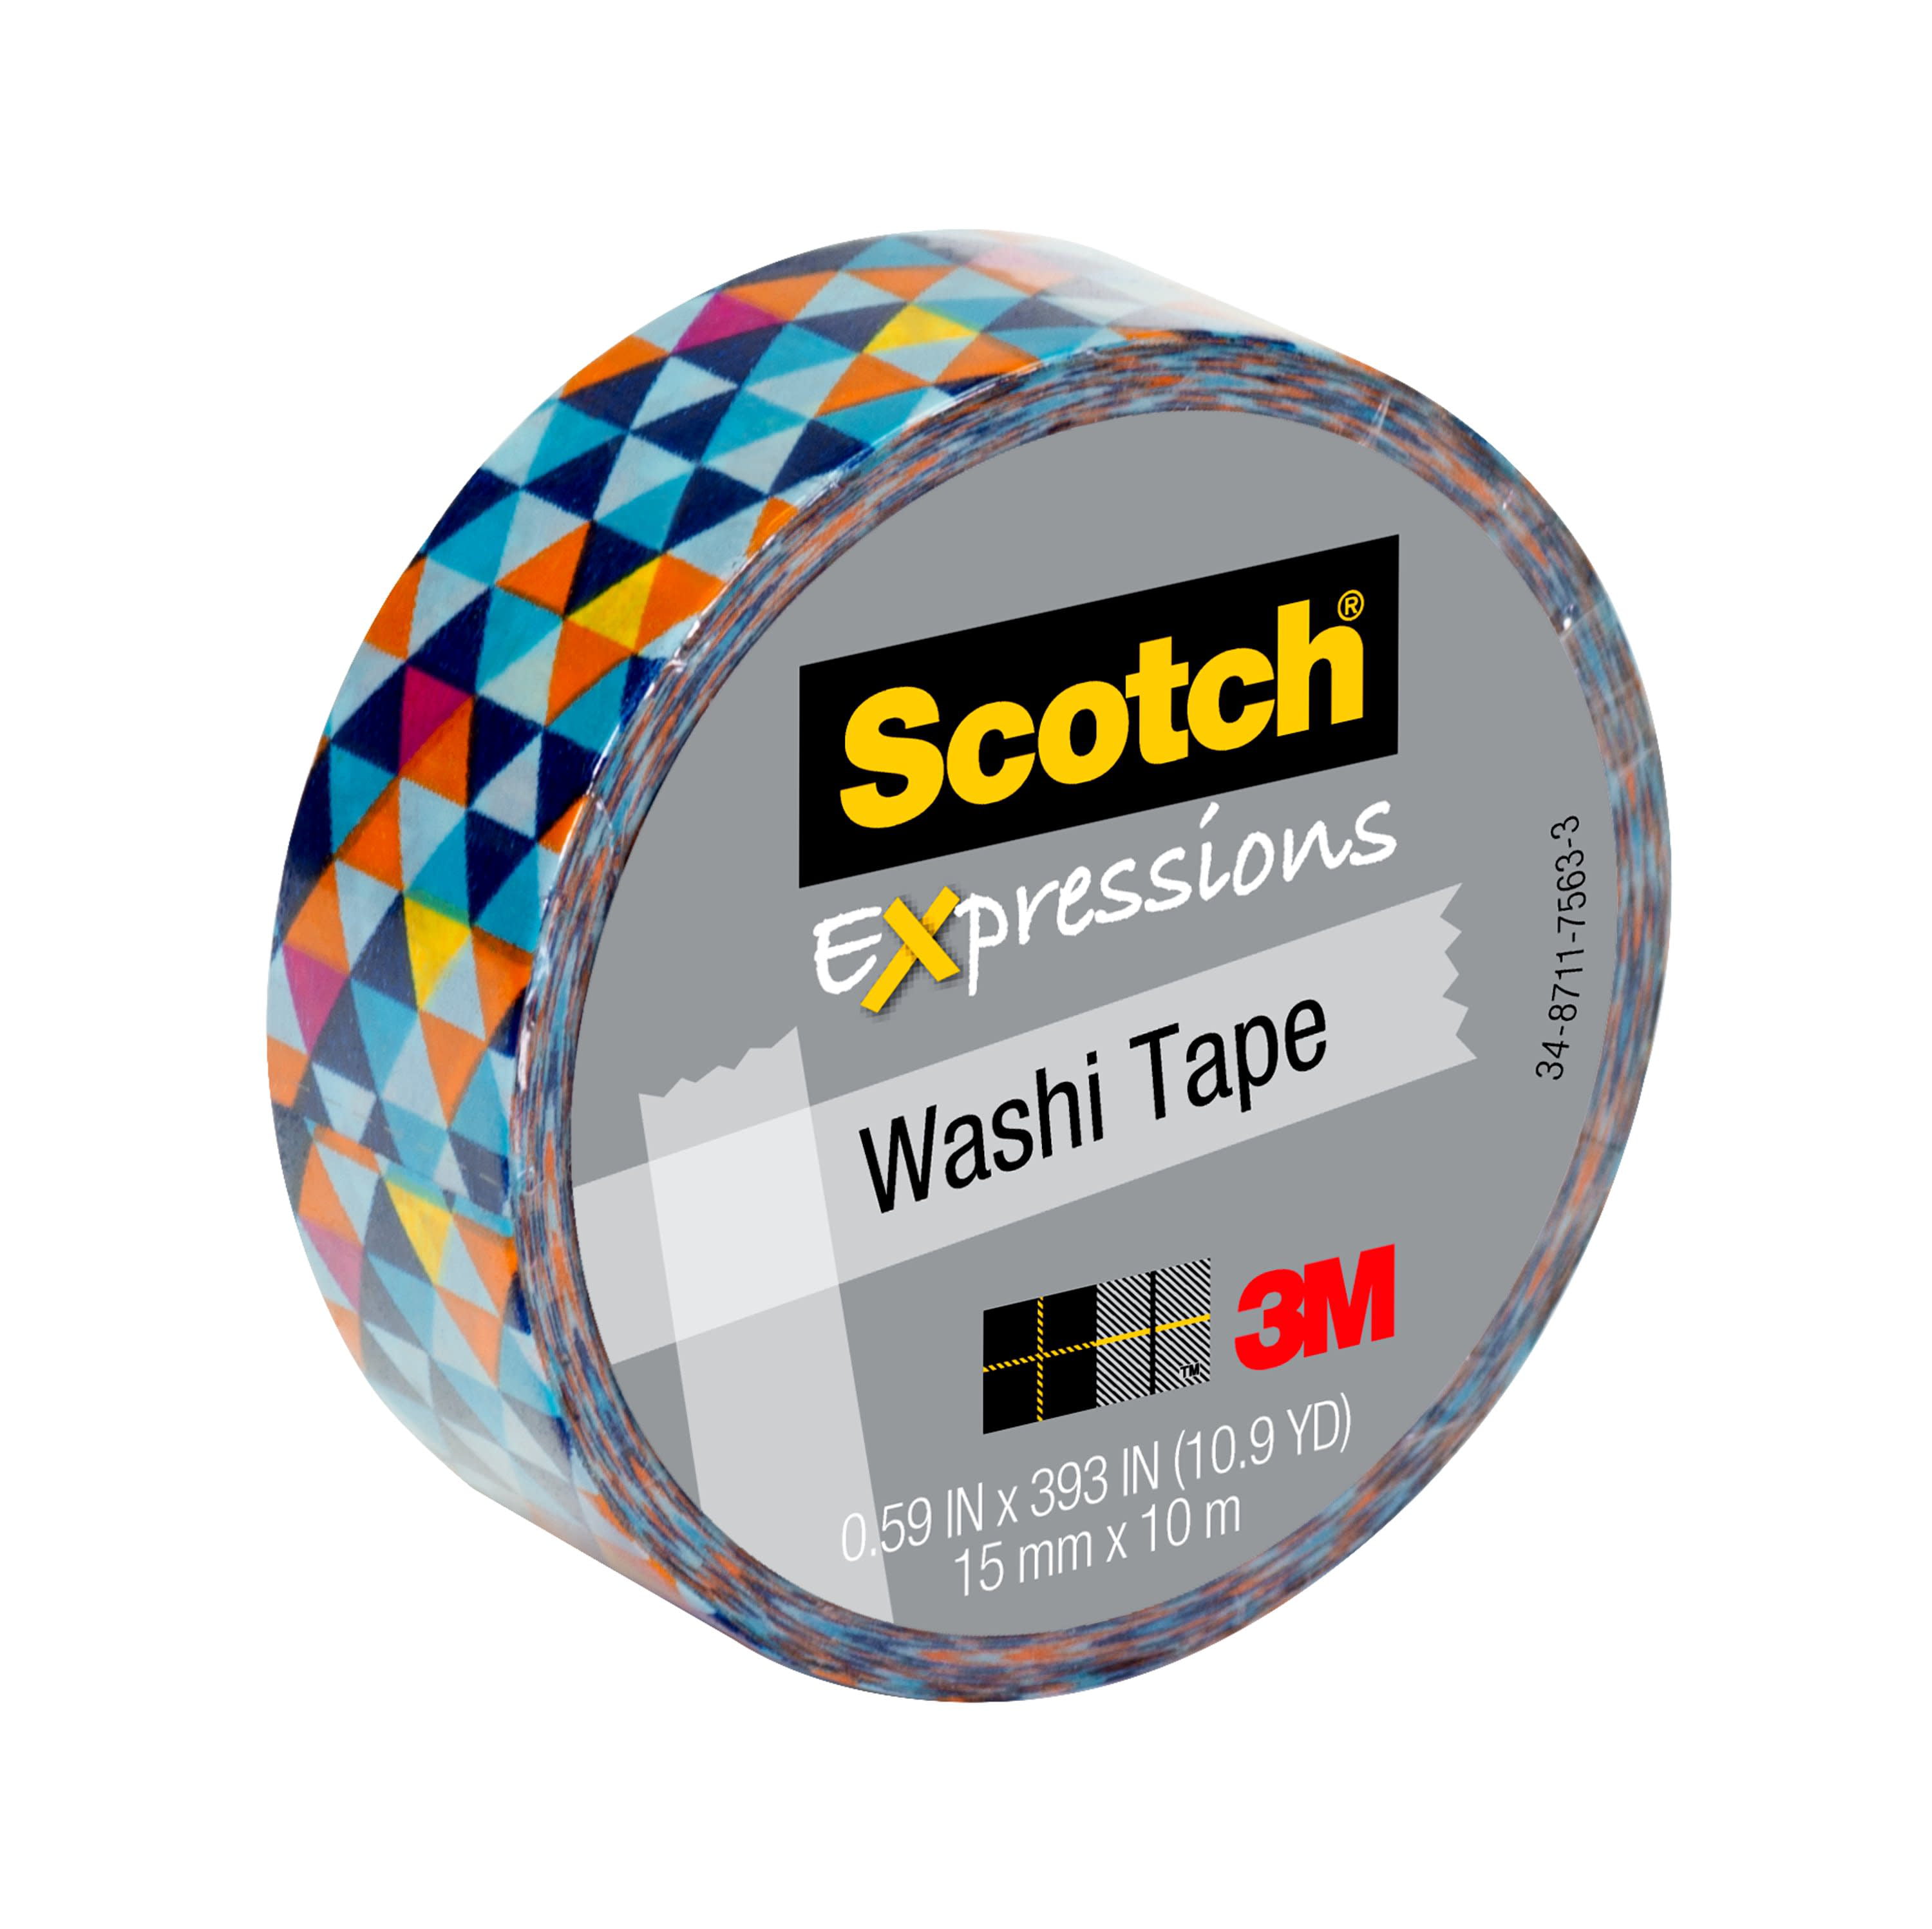 Scotch Expressions Washi Tape, 3 Rolls, Assorted Sizes, Great for  Decorating and Crafts (C1017-3-P10)